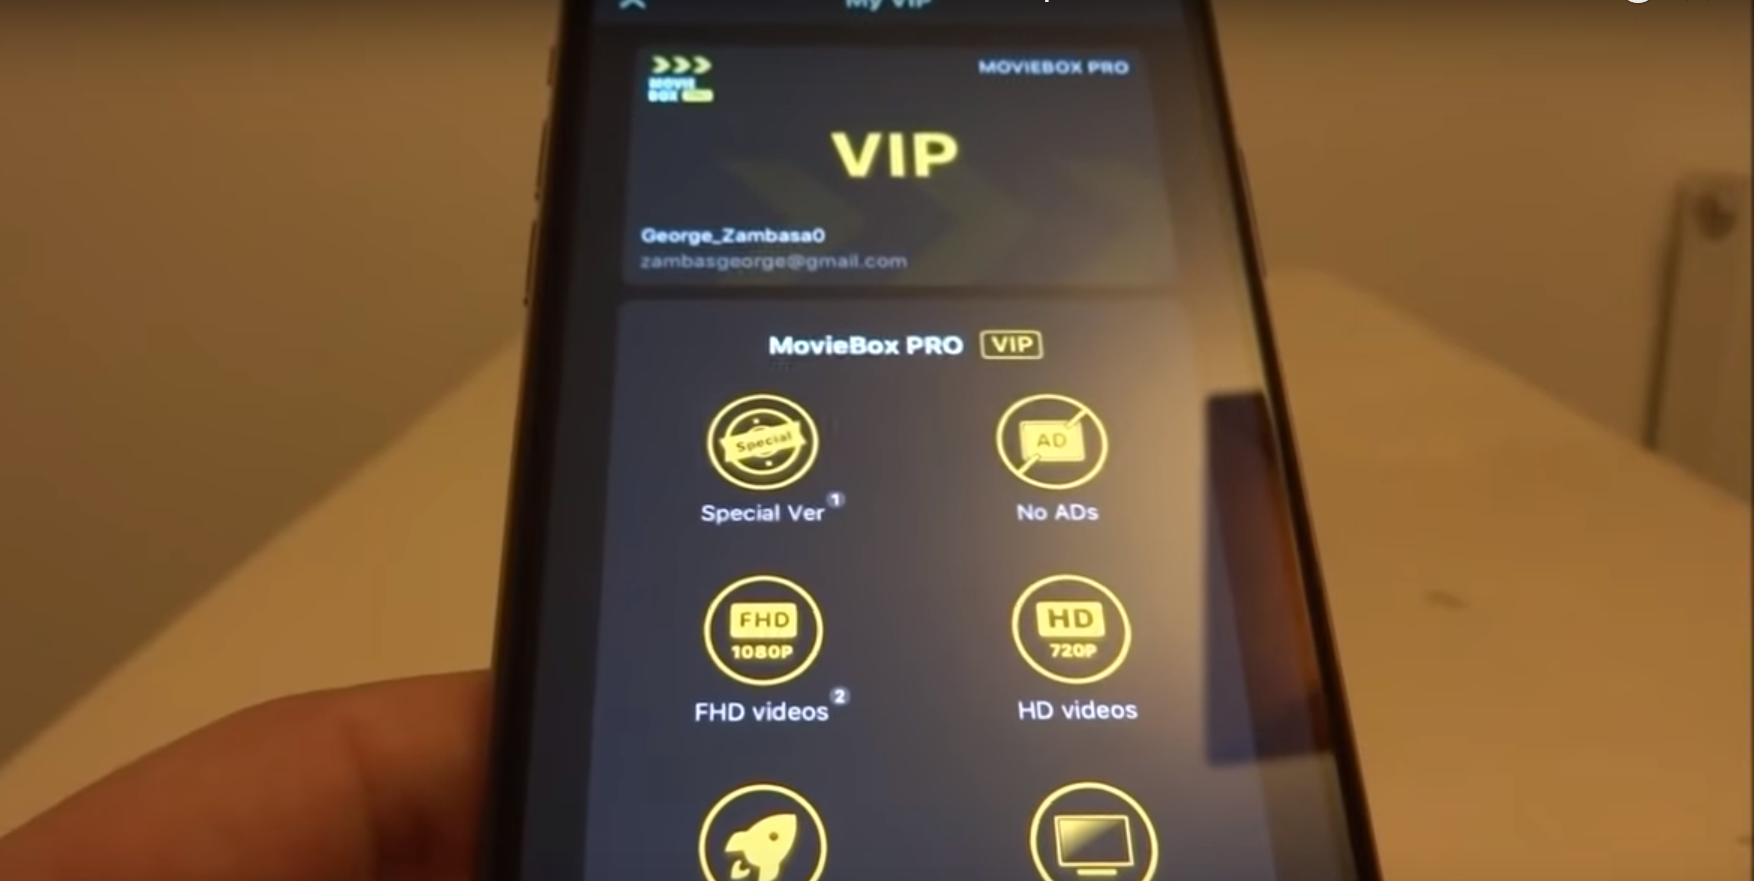 Here S How To Get Moviebox Pro Vip Access For Free On Ios Piunikaweb